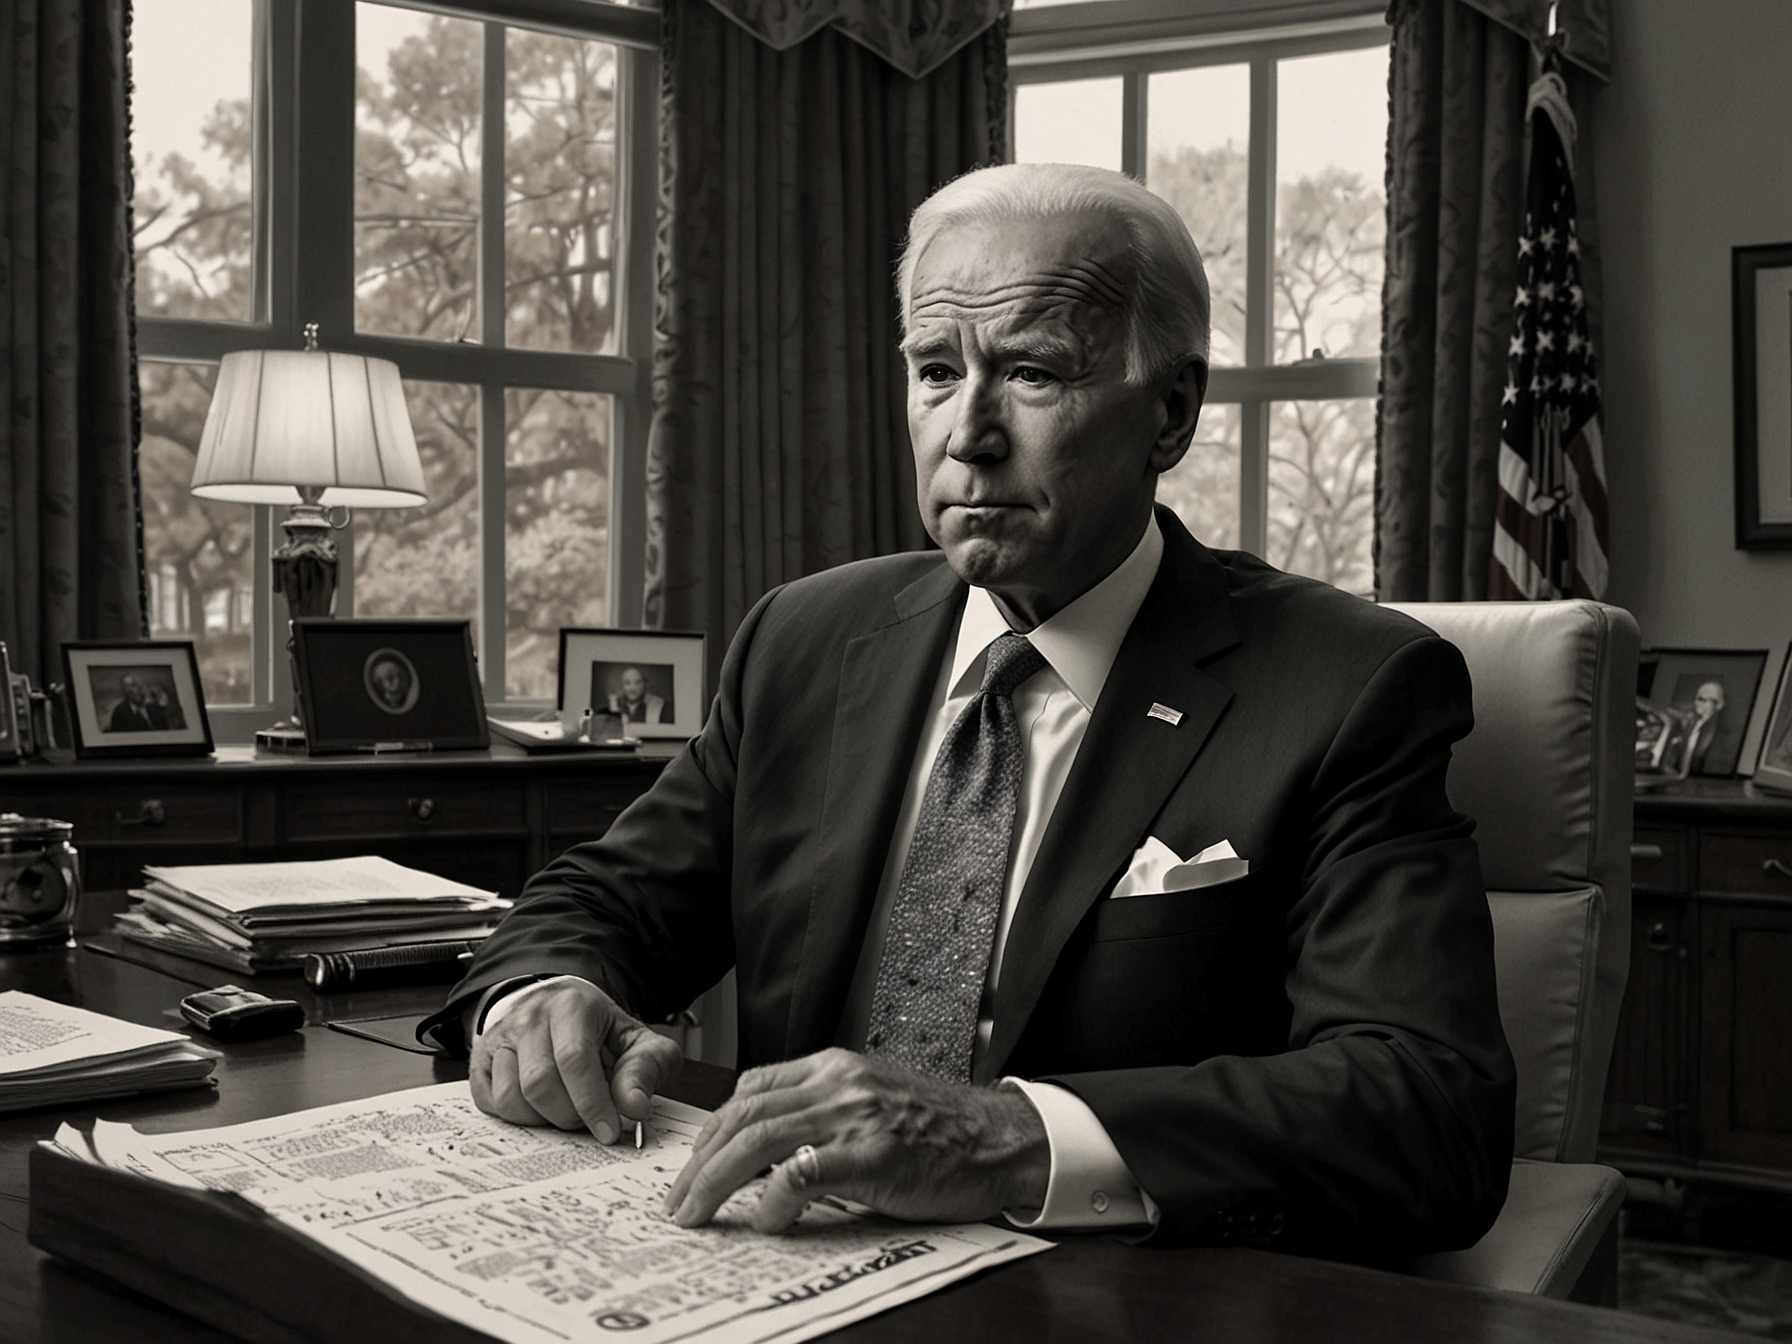 A tense Joe Biden sits at his desk in the Oval Office, surrounded by notes and reports, contemplating his re-election strategy amidst plummeting approval ratings and internal party dissent.